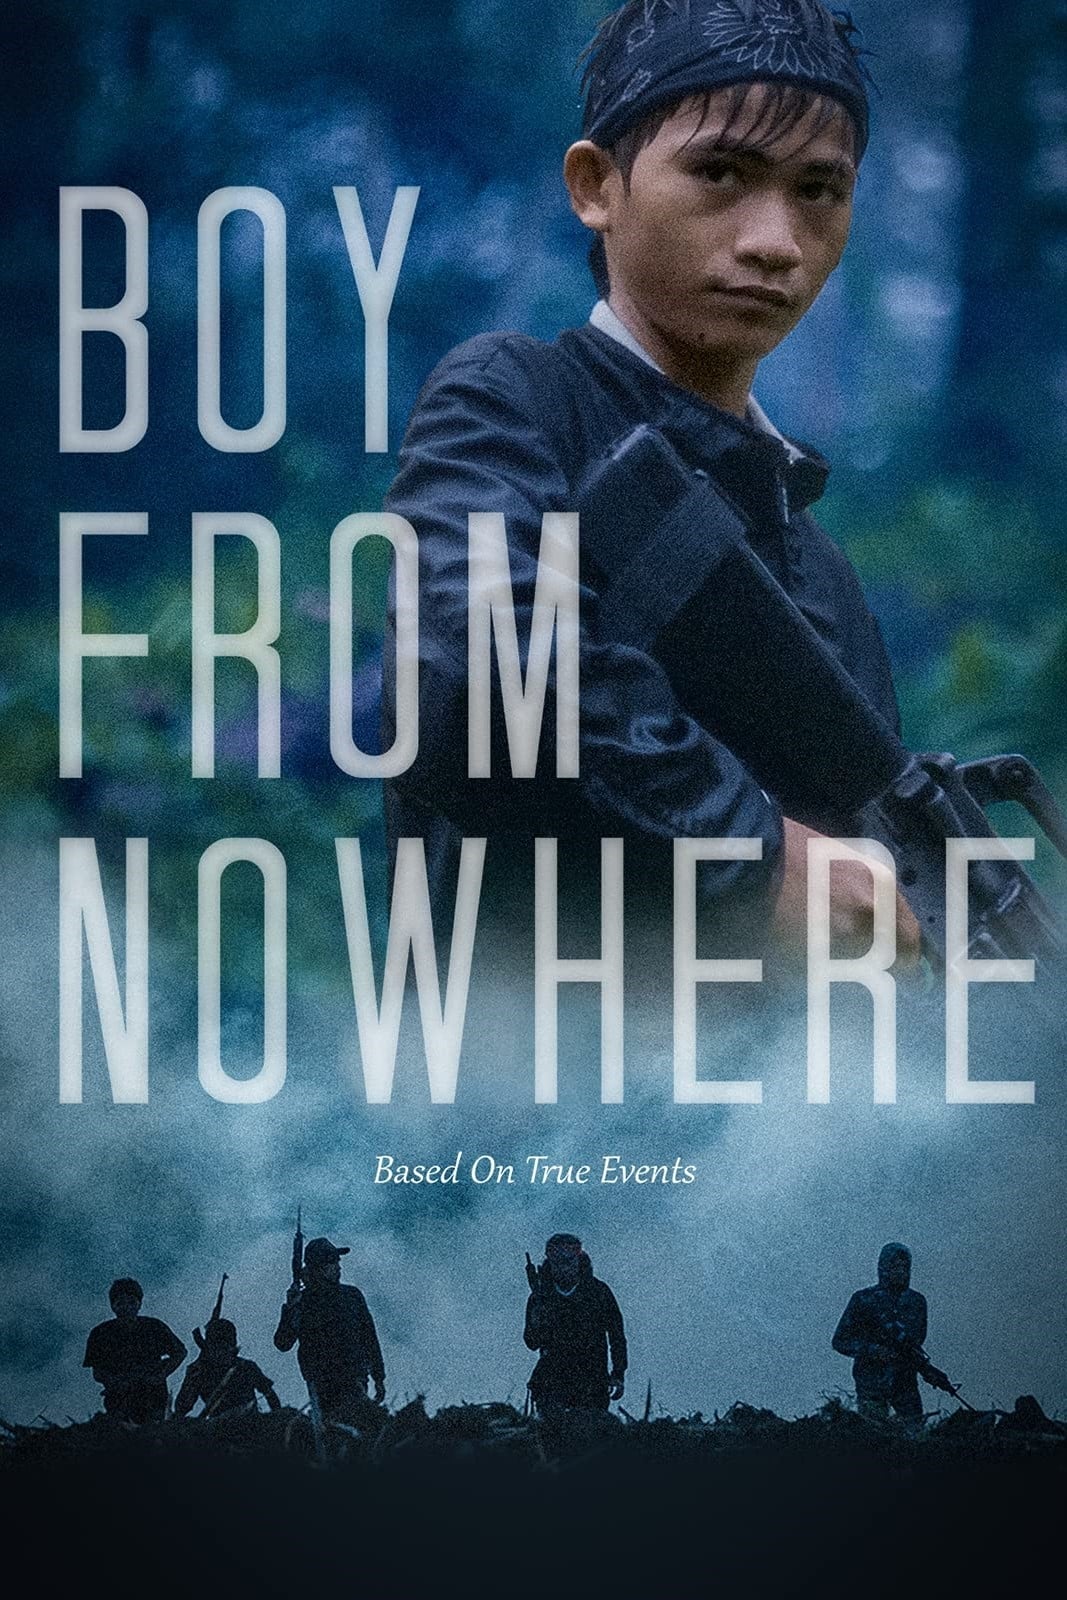 Boy From Nowhere